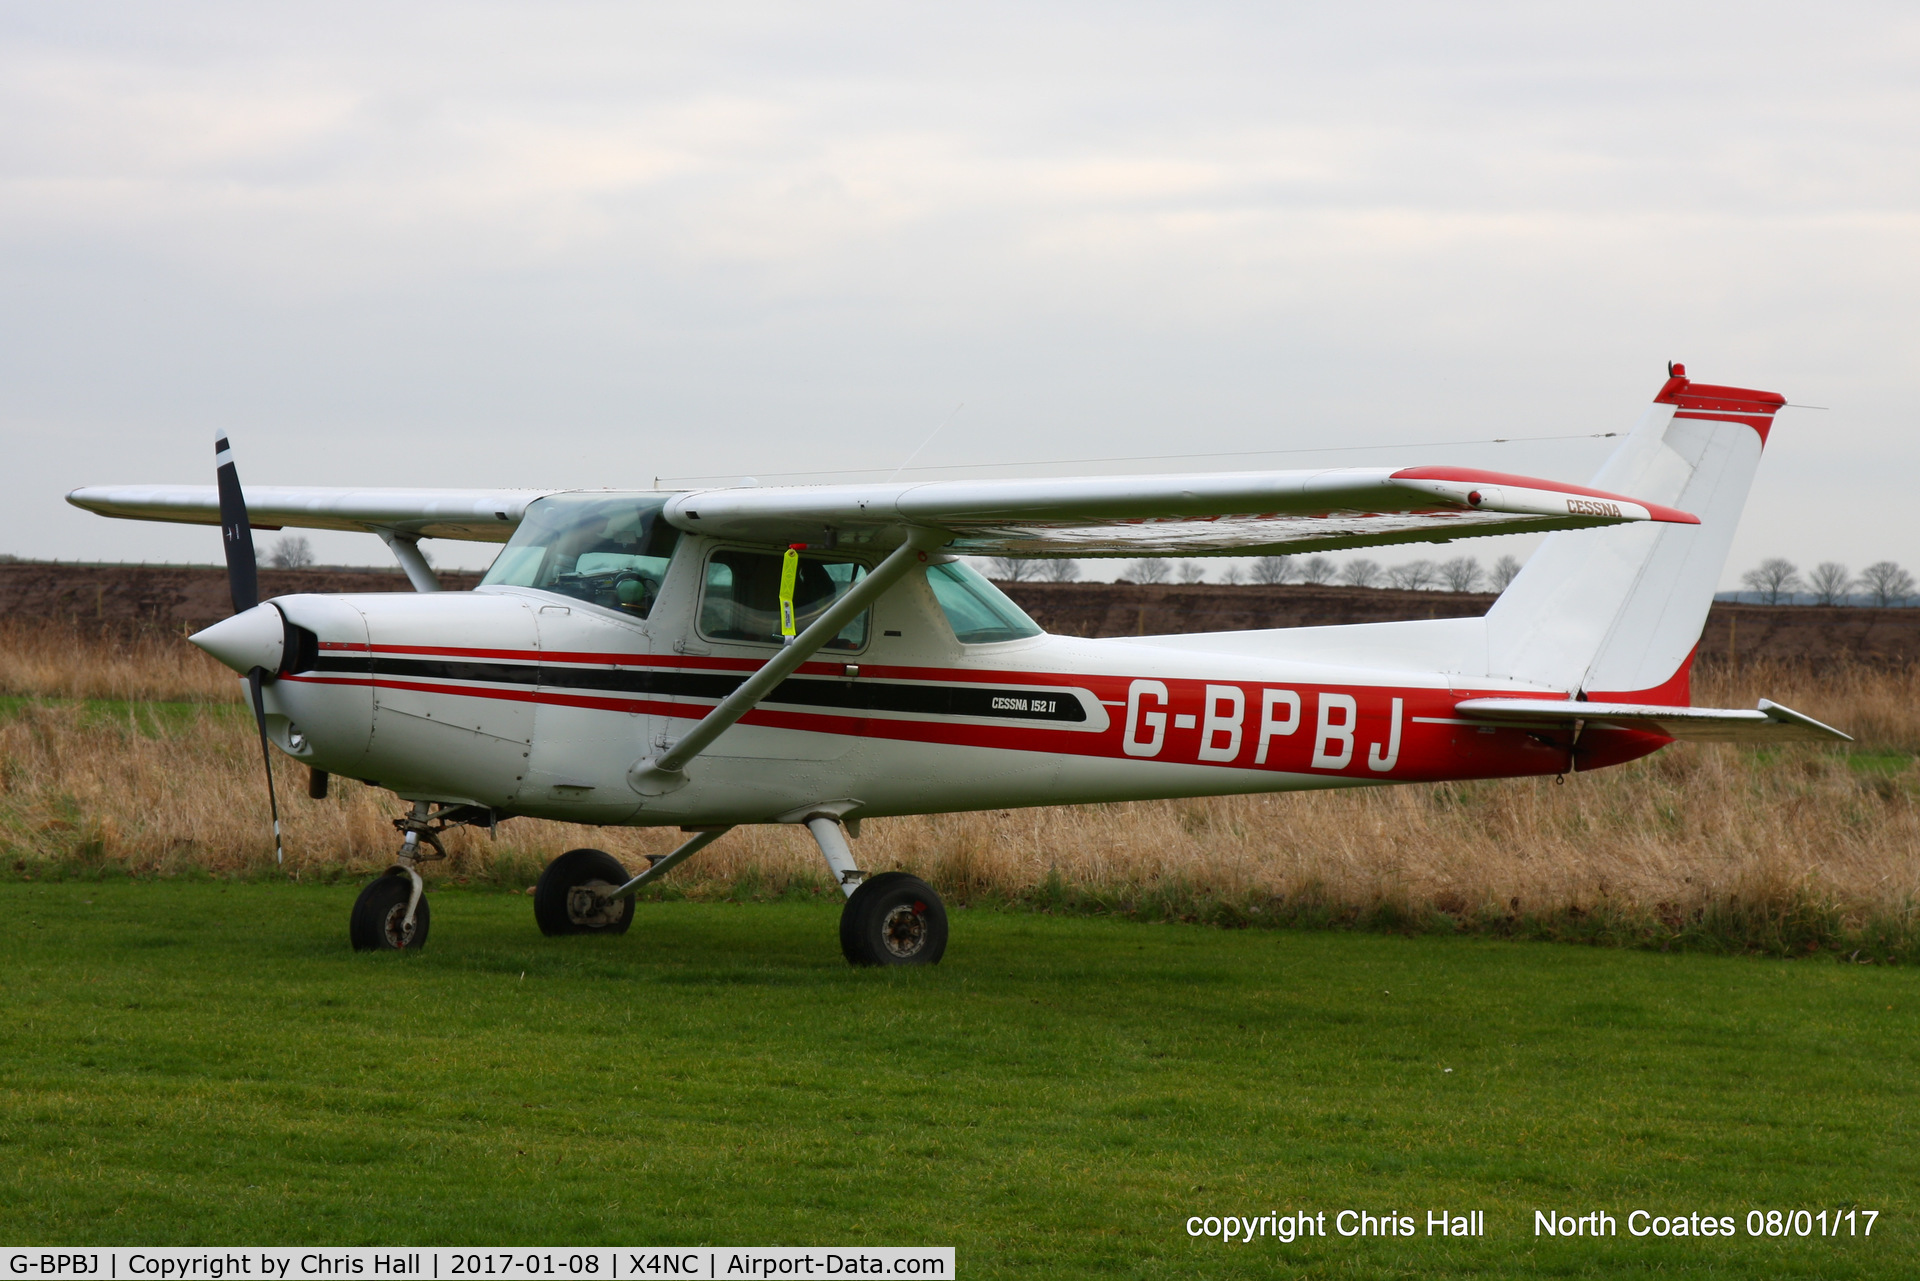 G-BPBJ, 1979 Cessna 152 C/N 152-83639, at the Brass Monkey fly in, North Coates